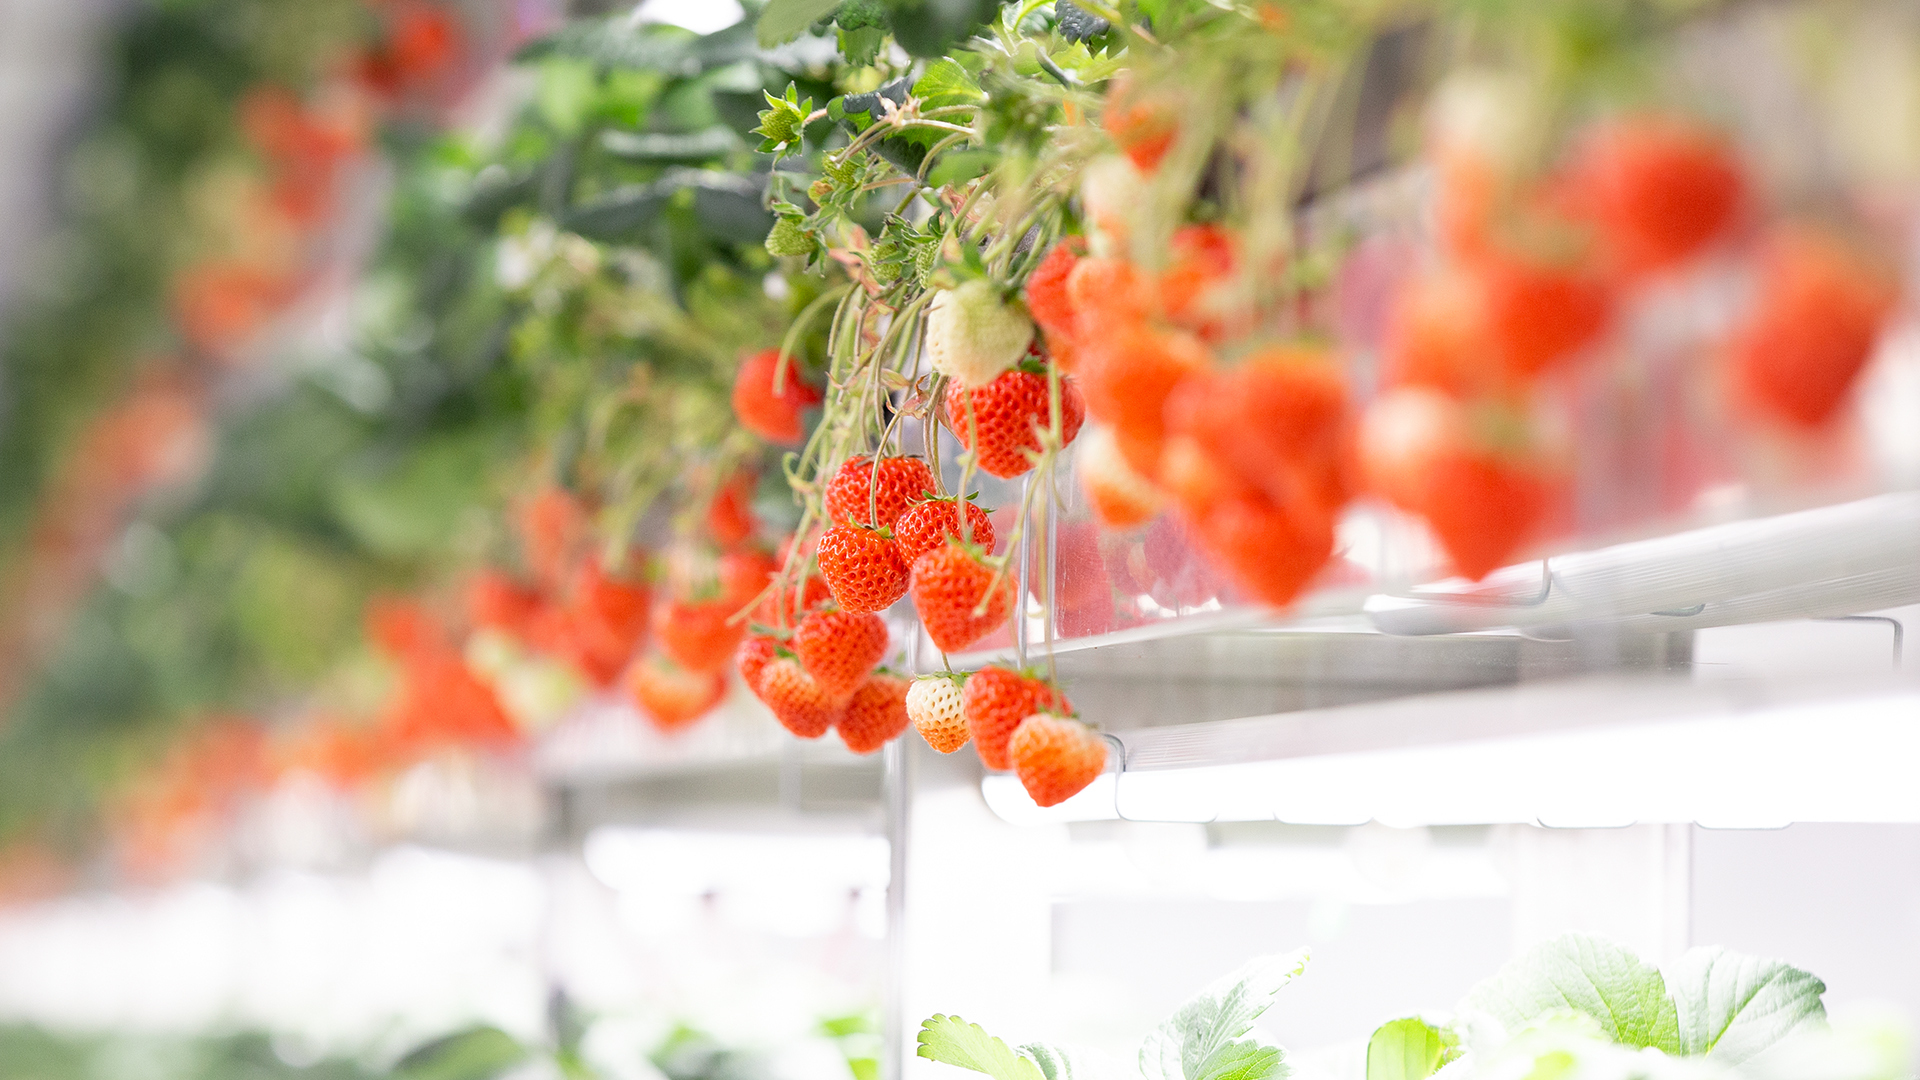 How Oishii's vertical farms grow strawberries that sell for $20 a box